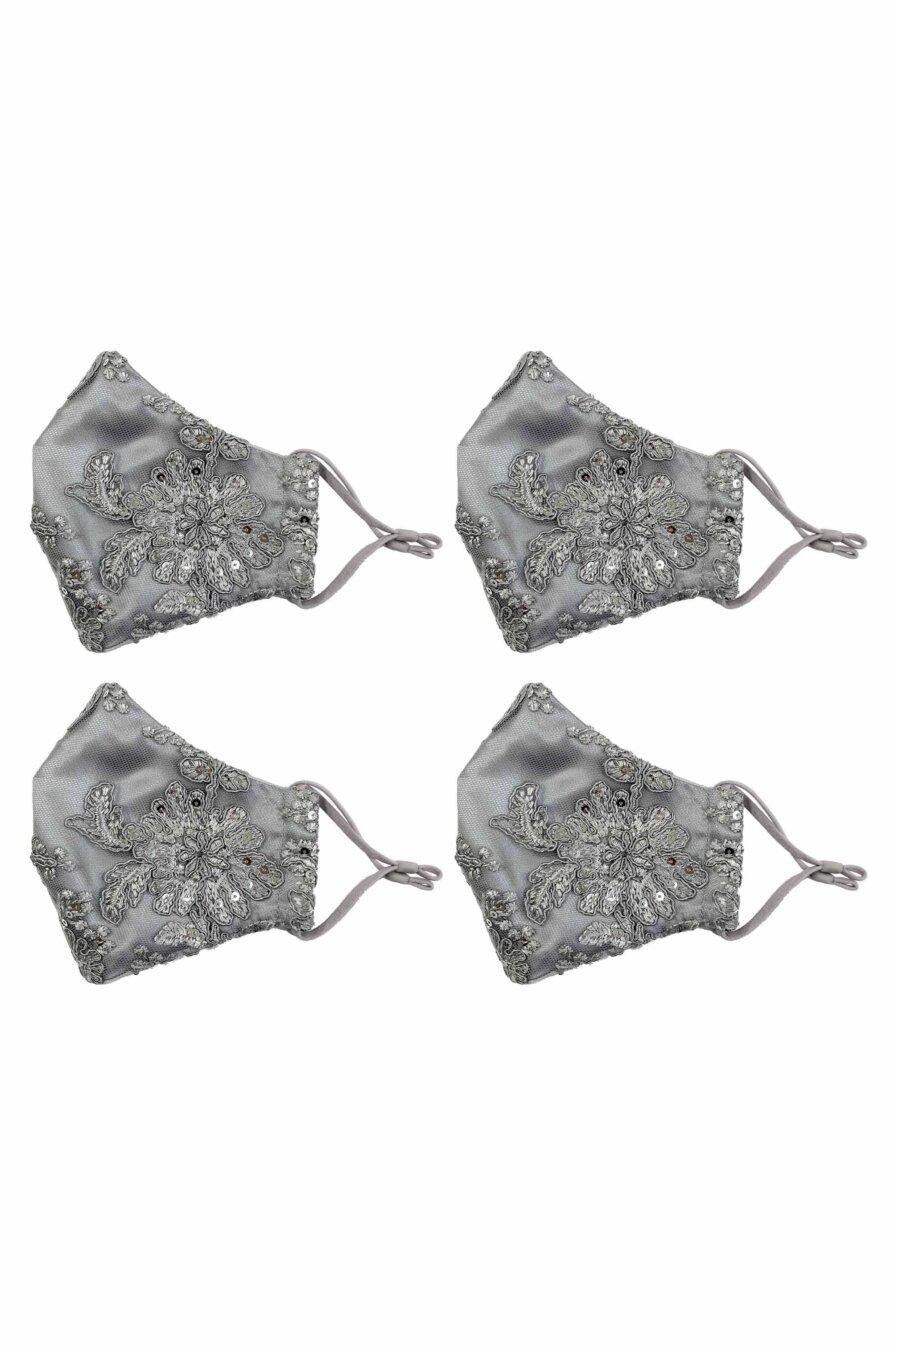 Chie Chic Posh Mask – A Set of Four (4) Spangle Grey